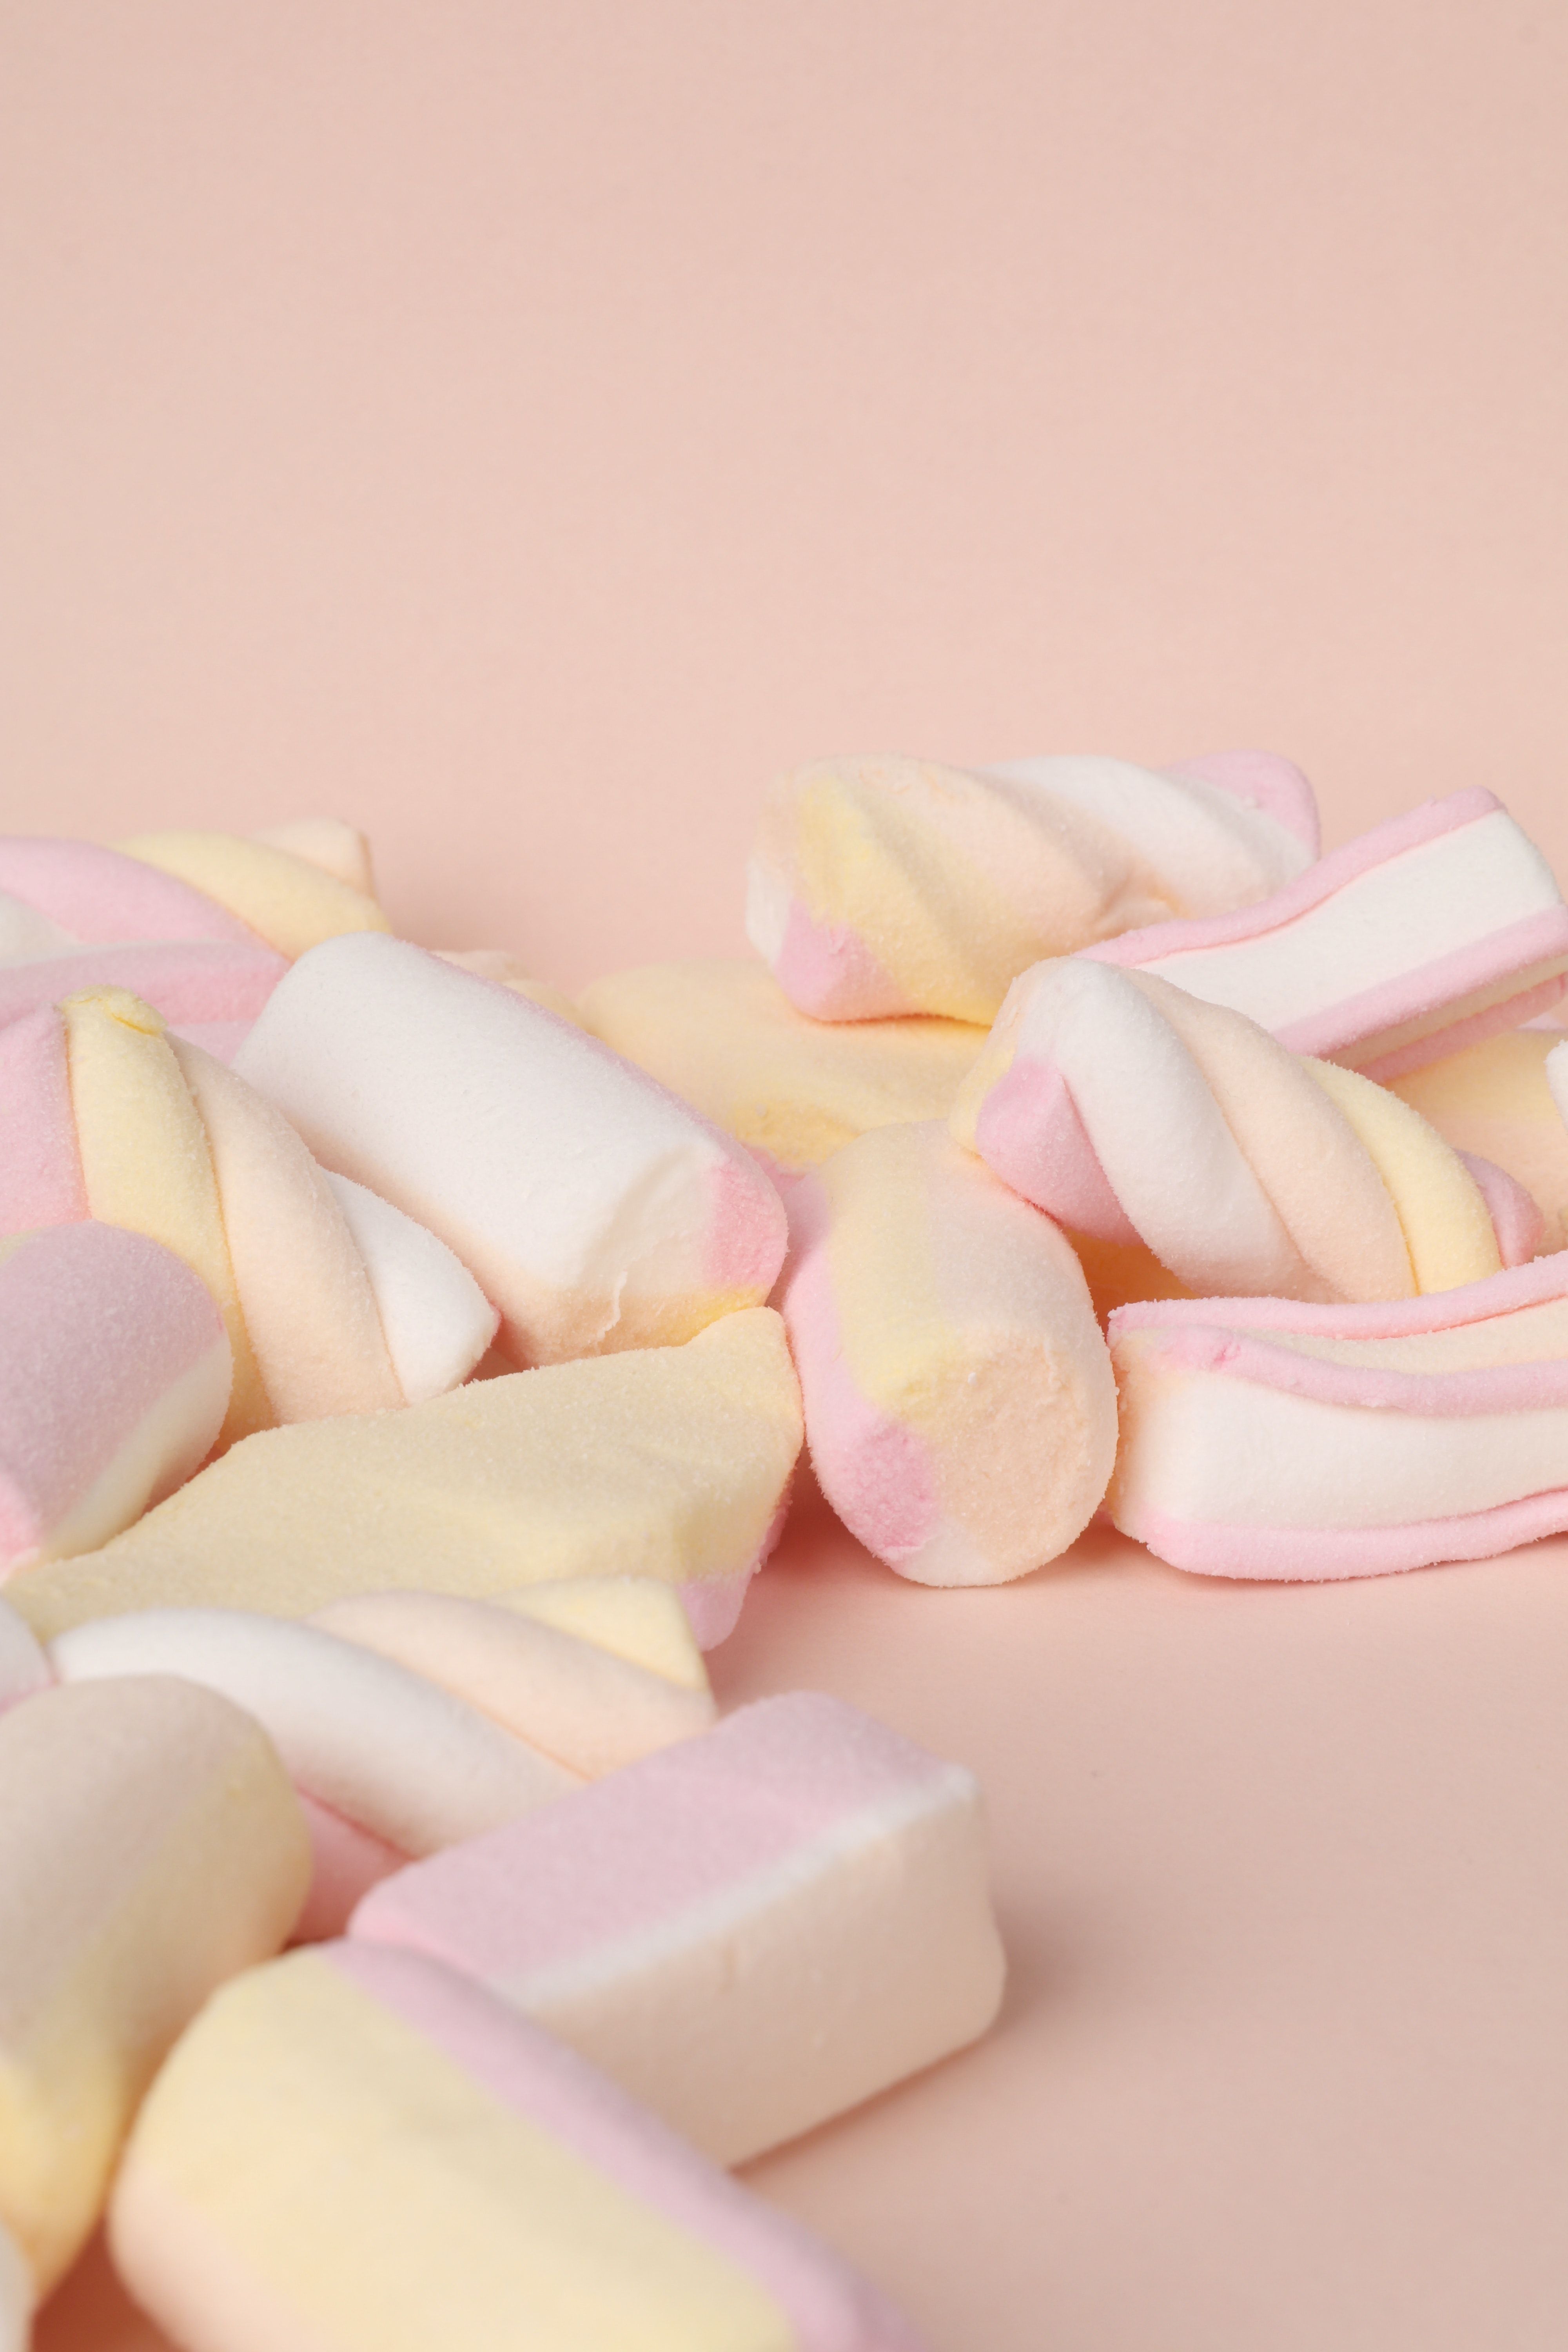 Soft pastel colored marshmallows on a pink background - Marshmallows